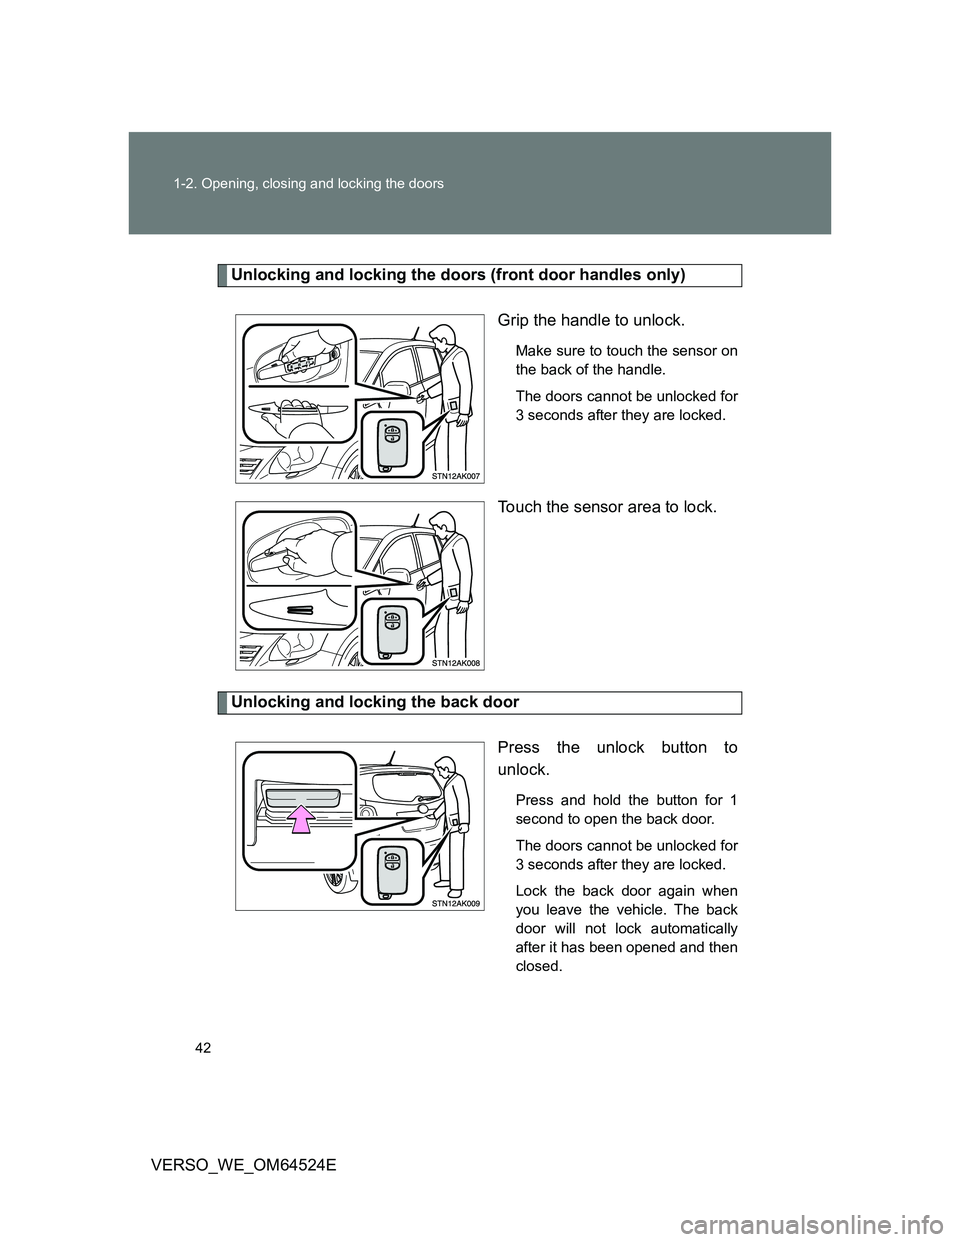 TOYOTA VERSO 2012  Owners Manual 42 1-2. Opening, closing and locking the doors
VERSO_WE_OM64524E
Unlocking and locking the doors (front door handles only)
Grip the handle to unlock.
Make sure to touch the sensor on
the back of the h